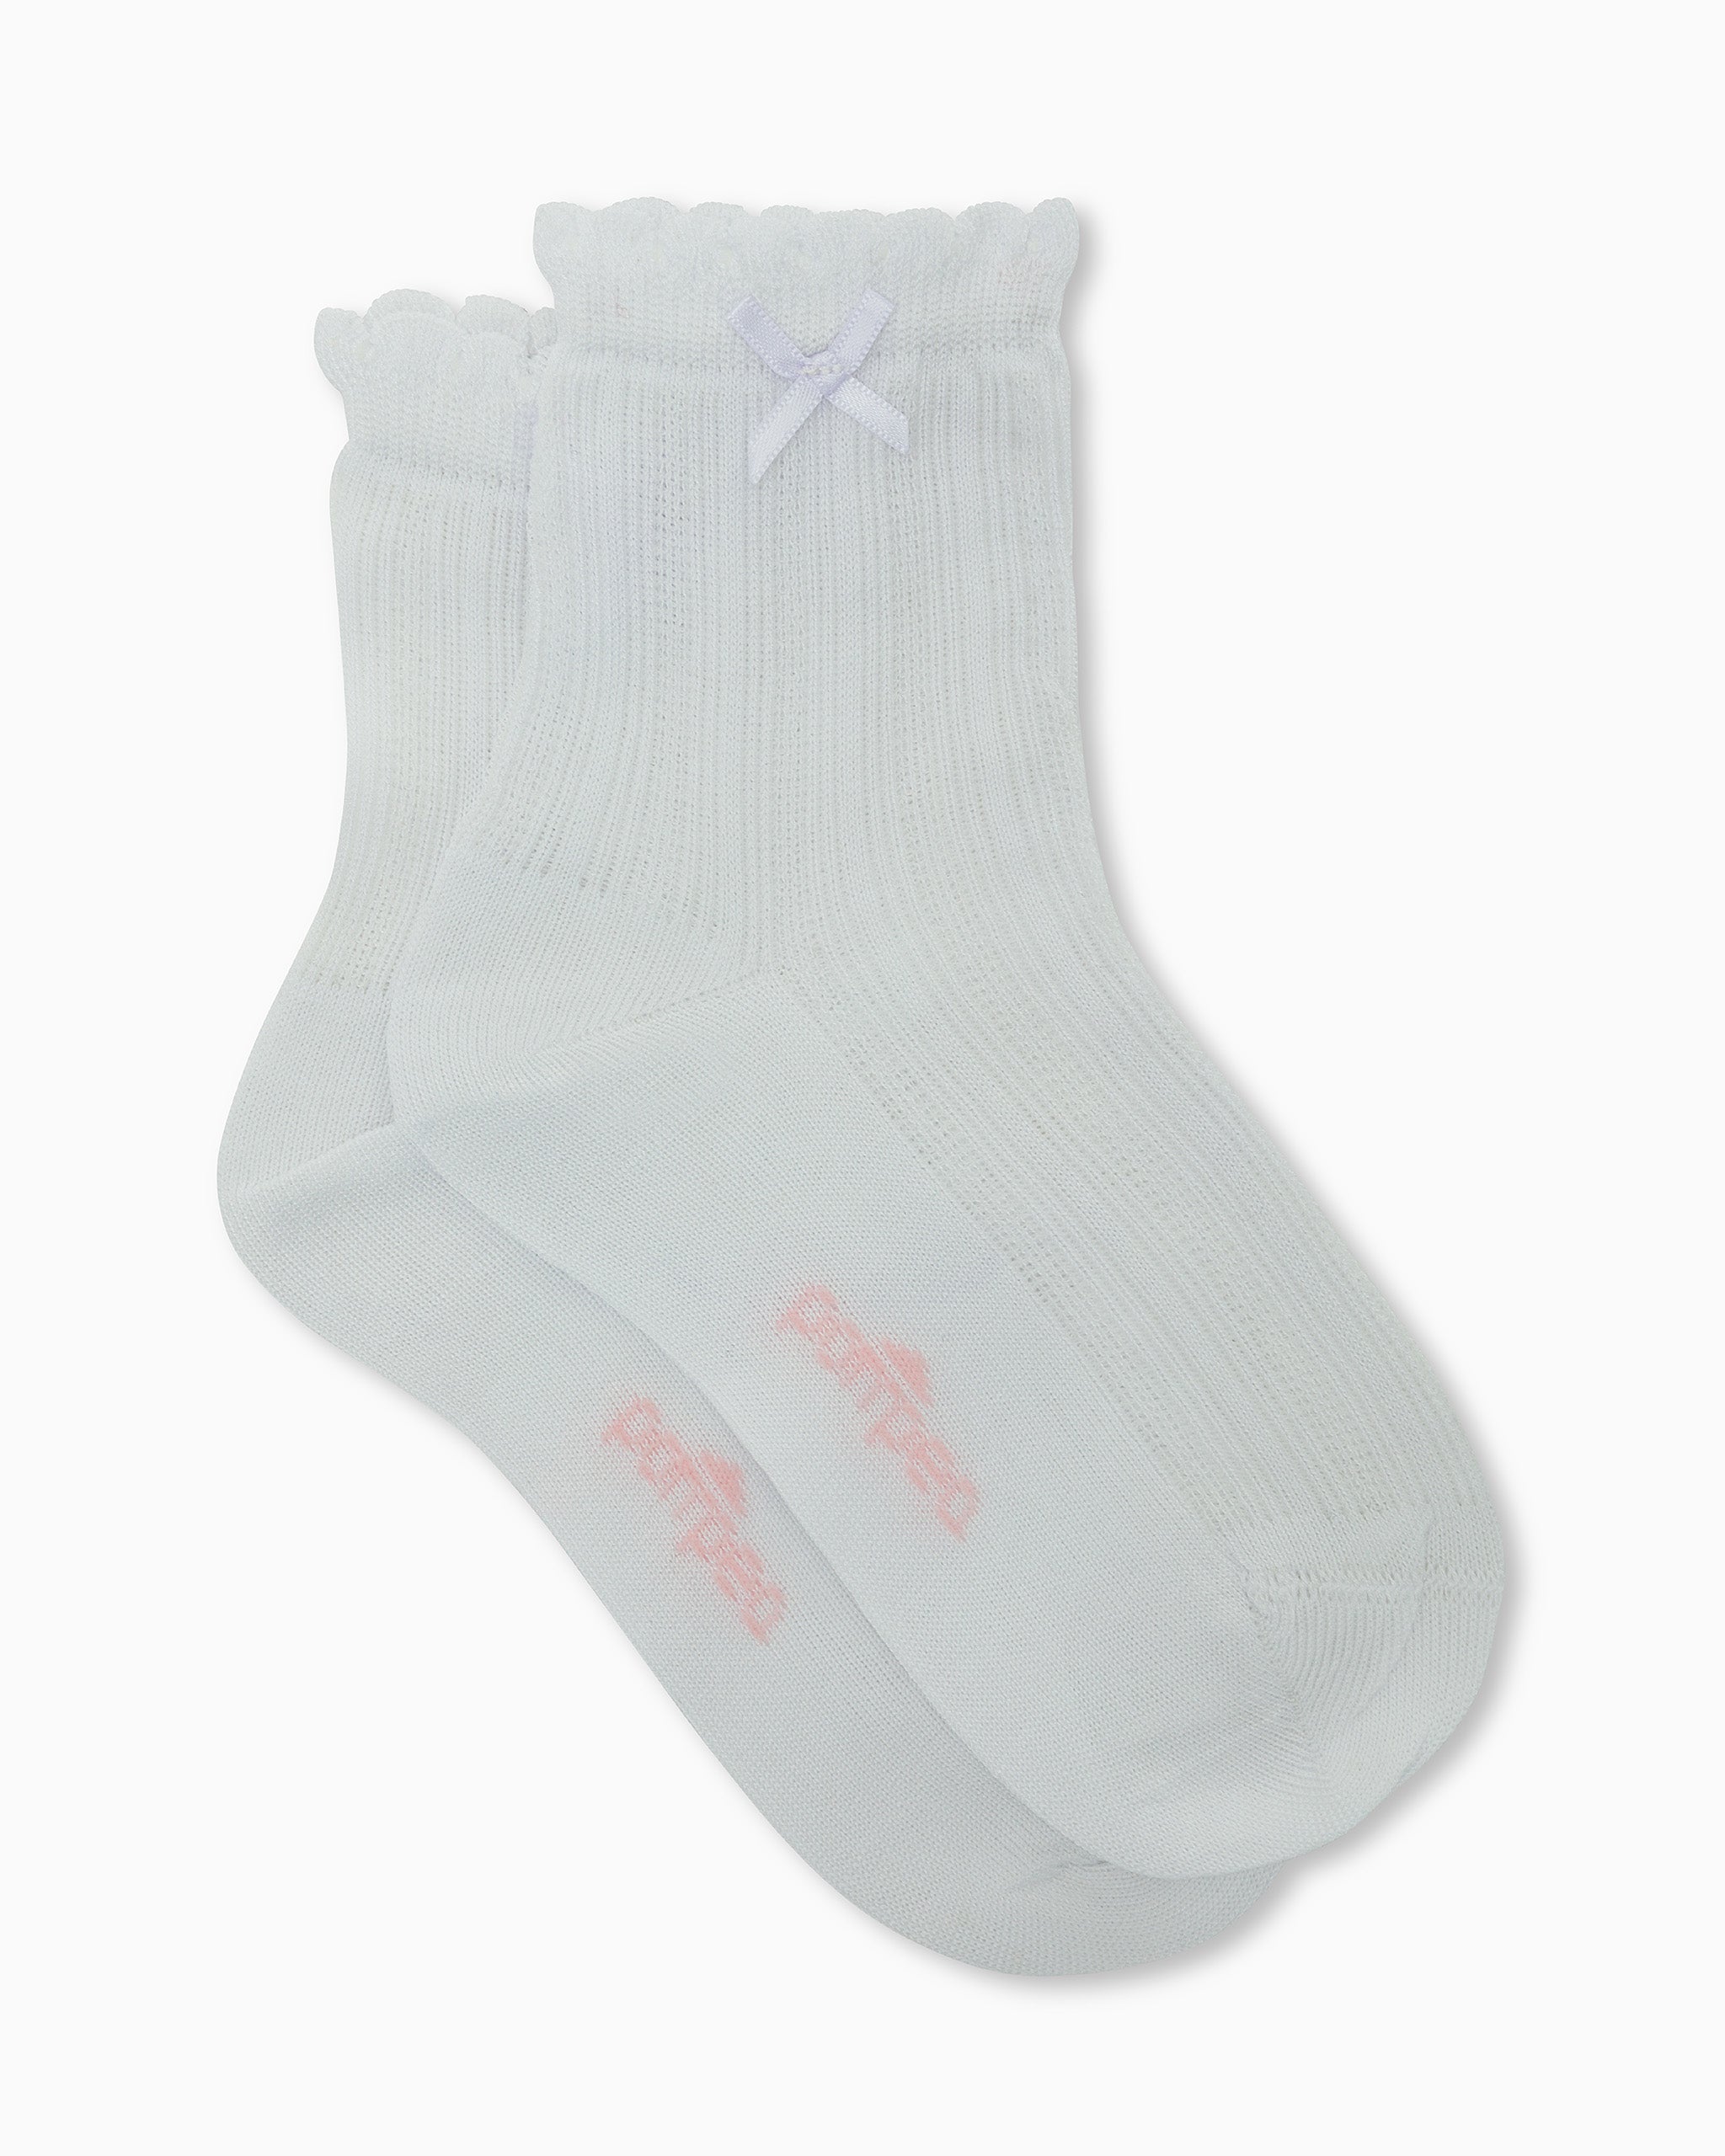 DIANA GIRLS' SOCK WITH BOW